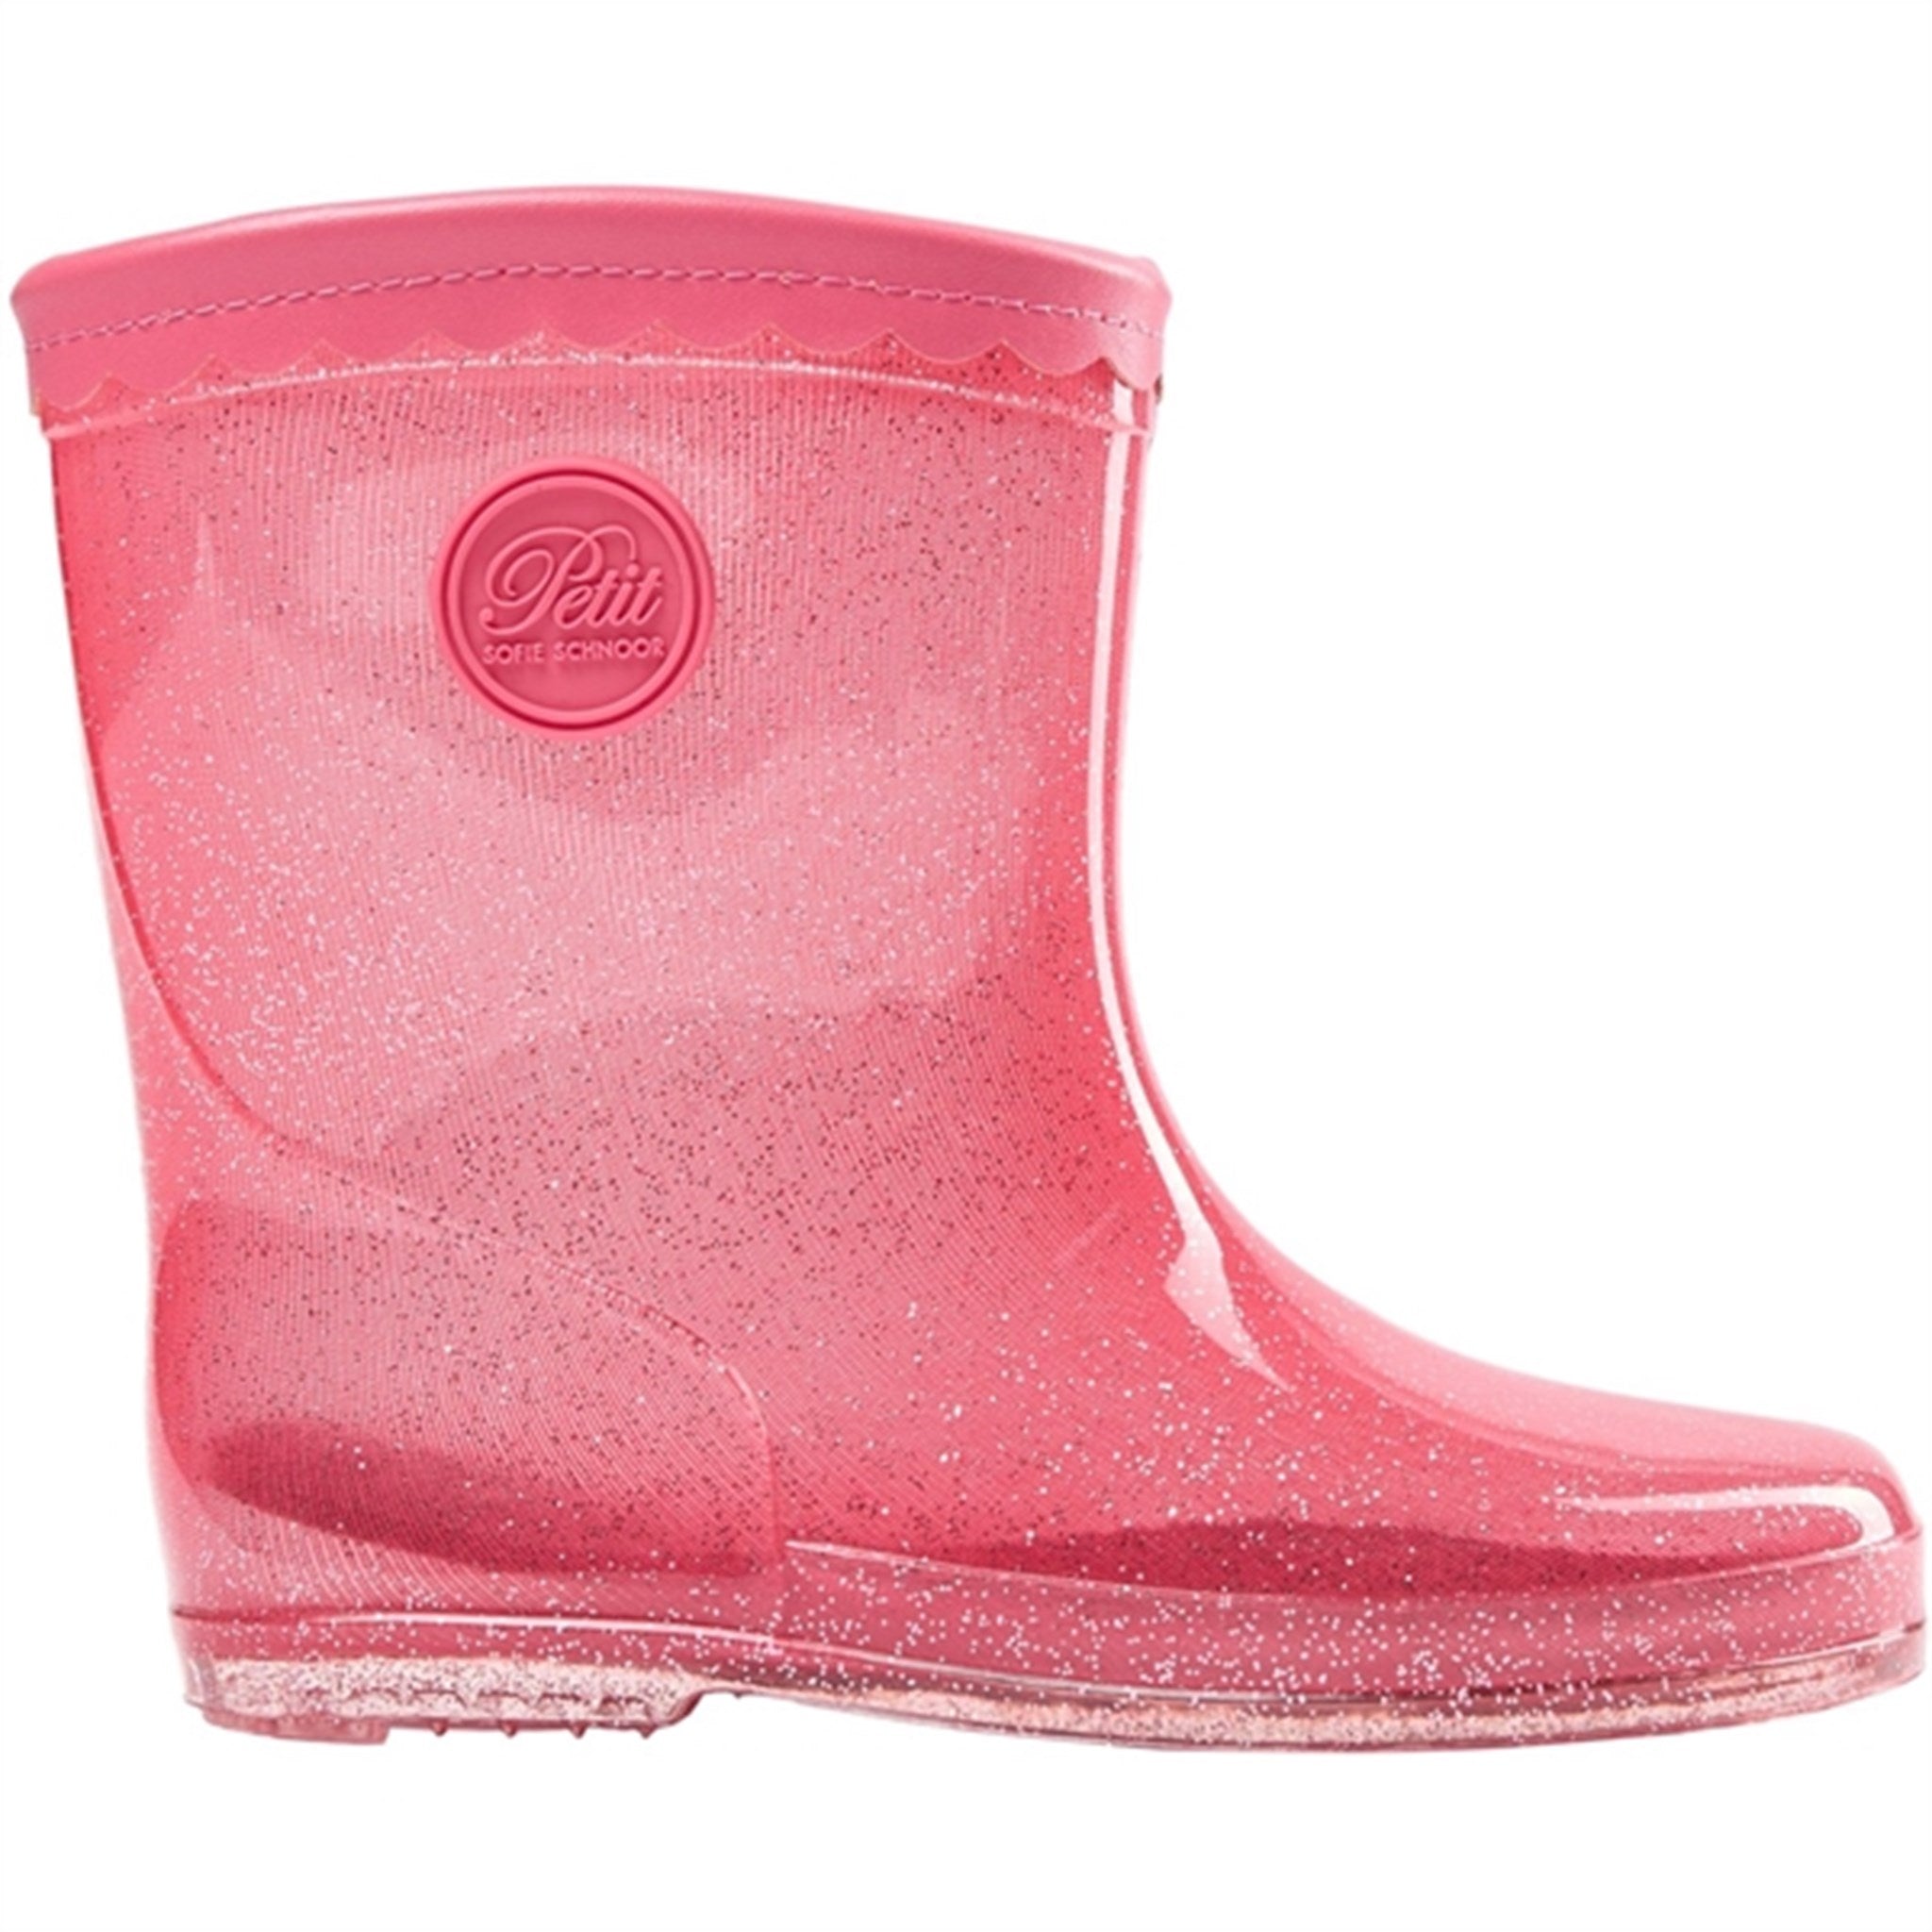 Sofie Schnoor Rubber Boots Coral Pink 6